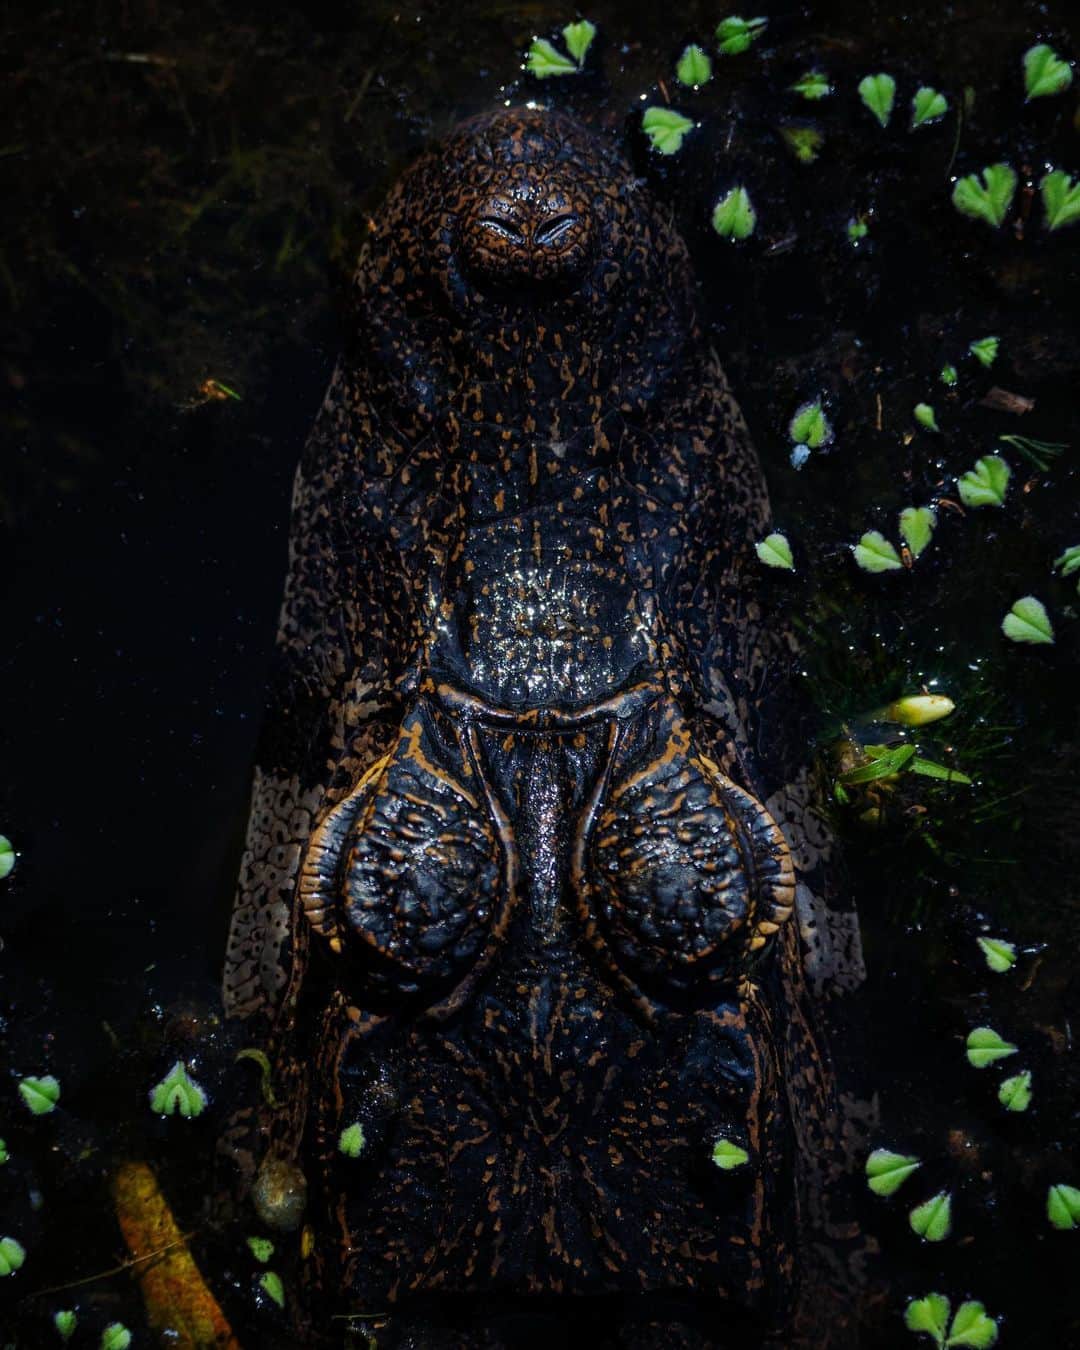 Keith Ladzinskiのインスタグラム：「An ornately camouflaged, juvenile caiman patiently waiting for prey in a small pond. From a top down perspective, this caiman’s eyes resemble small turtle shells basking in the sun on a rock.」